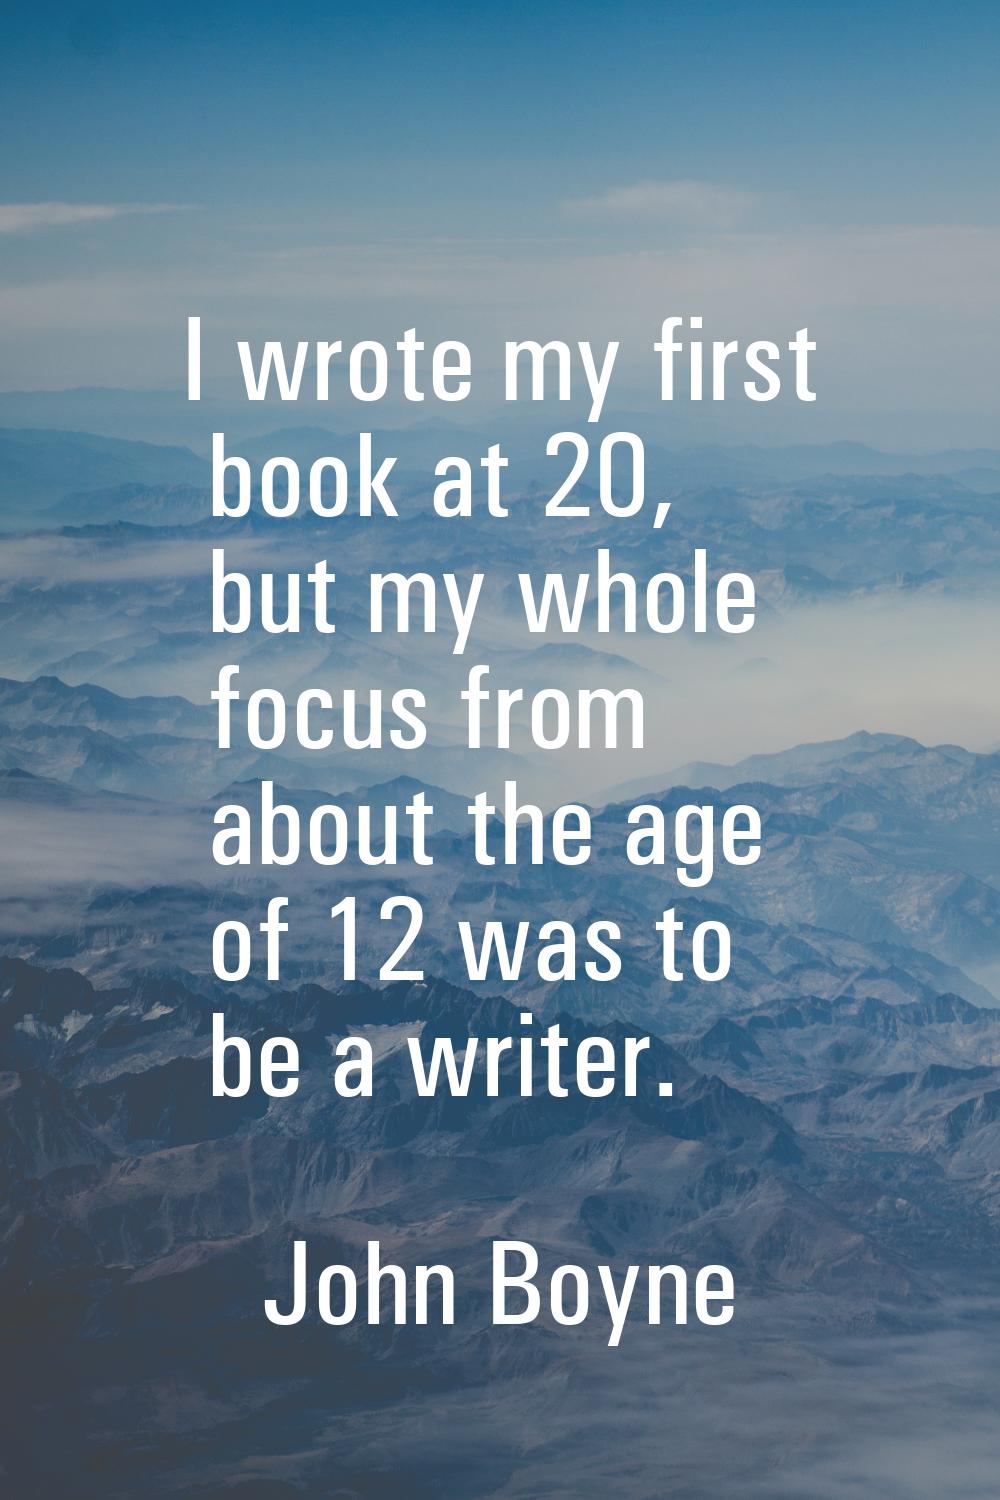 I wrote my first book at 20, but my whole focus from about the age of 12 was to be a writer.